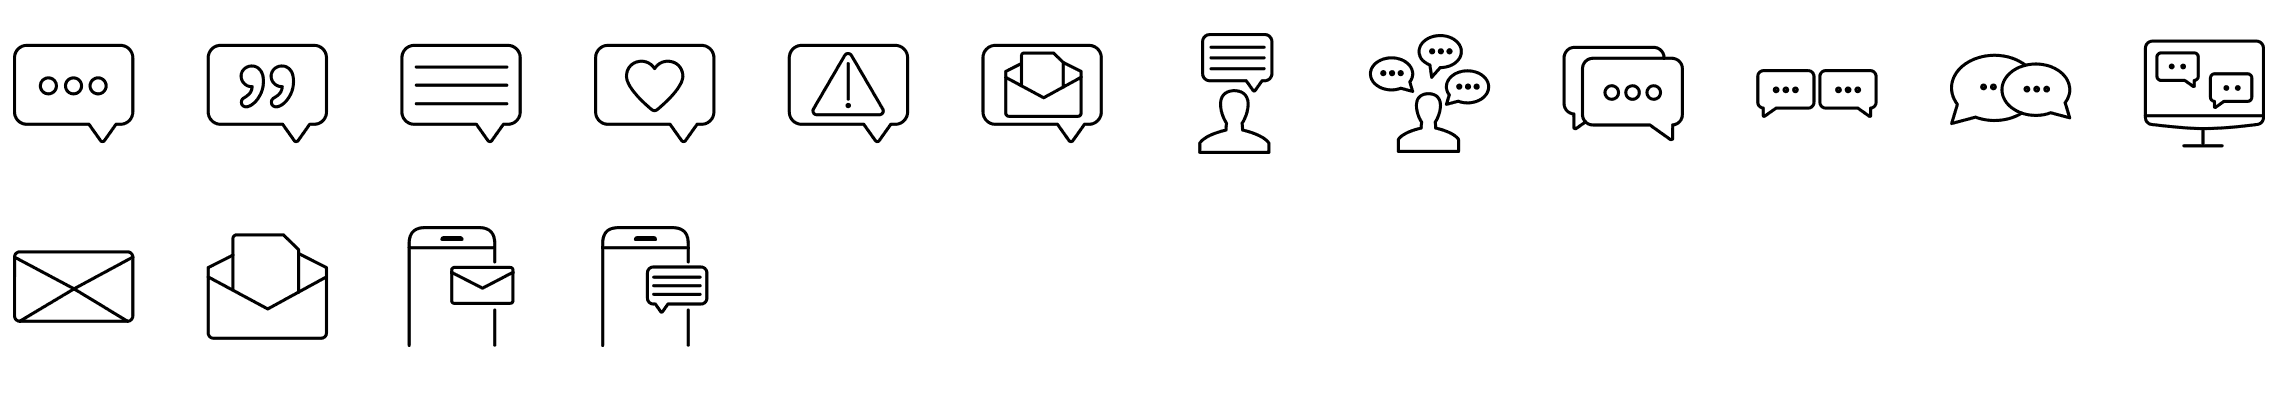 chat-messages-line-icons-preview